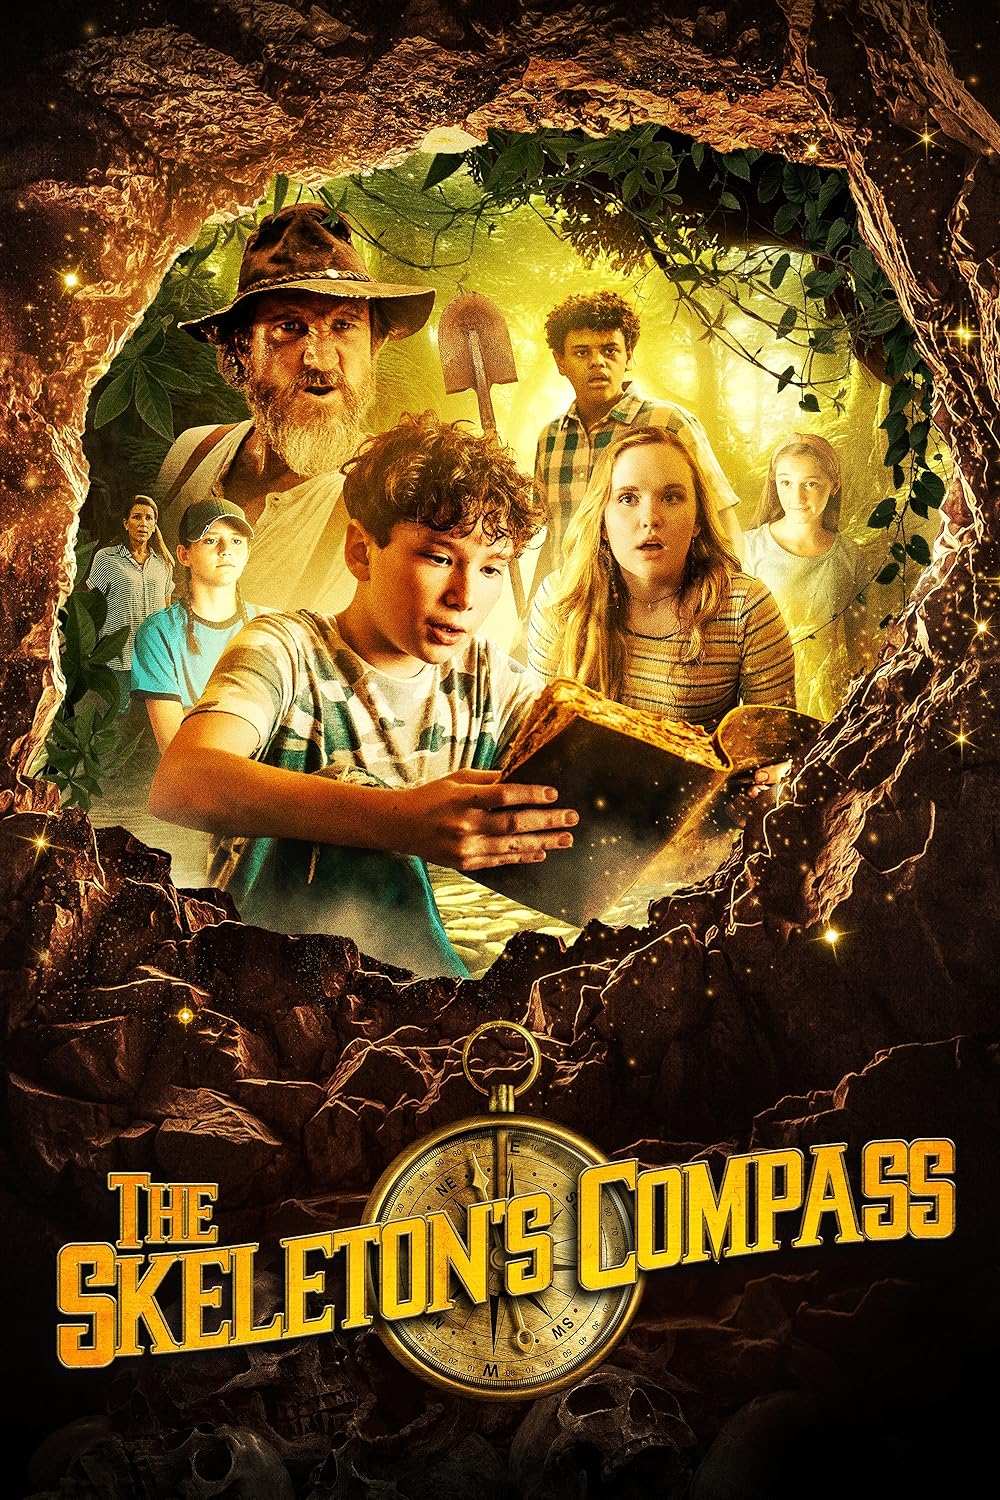 The Skeletons Compass 2022 Hindi Dual Audio BRRip Full Movie Download